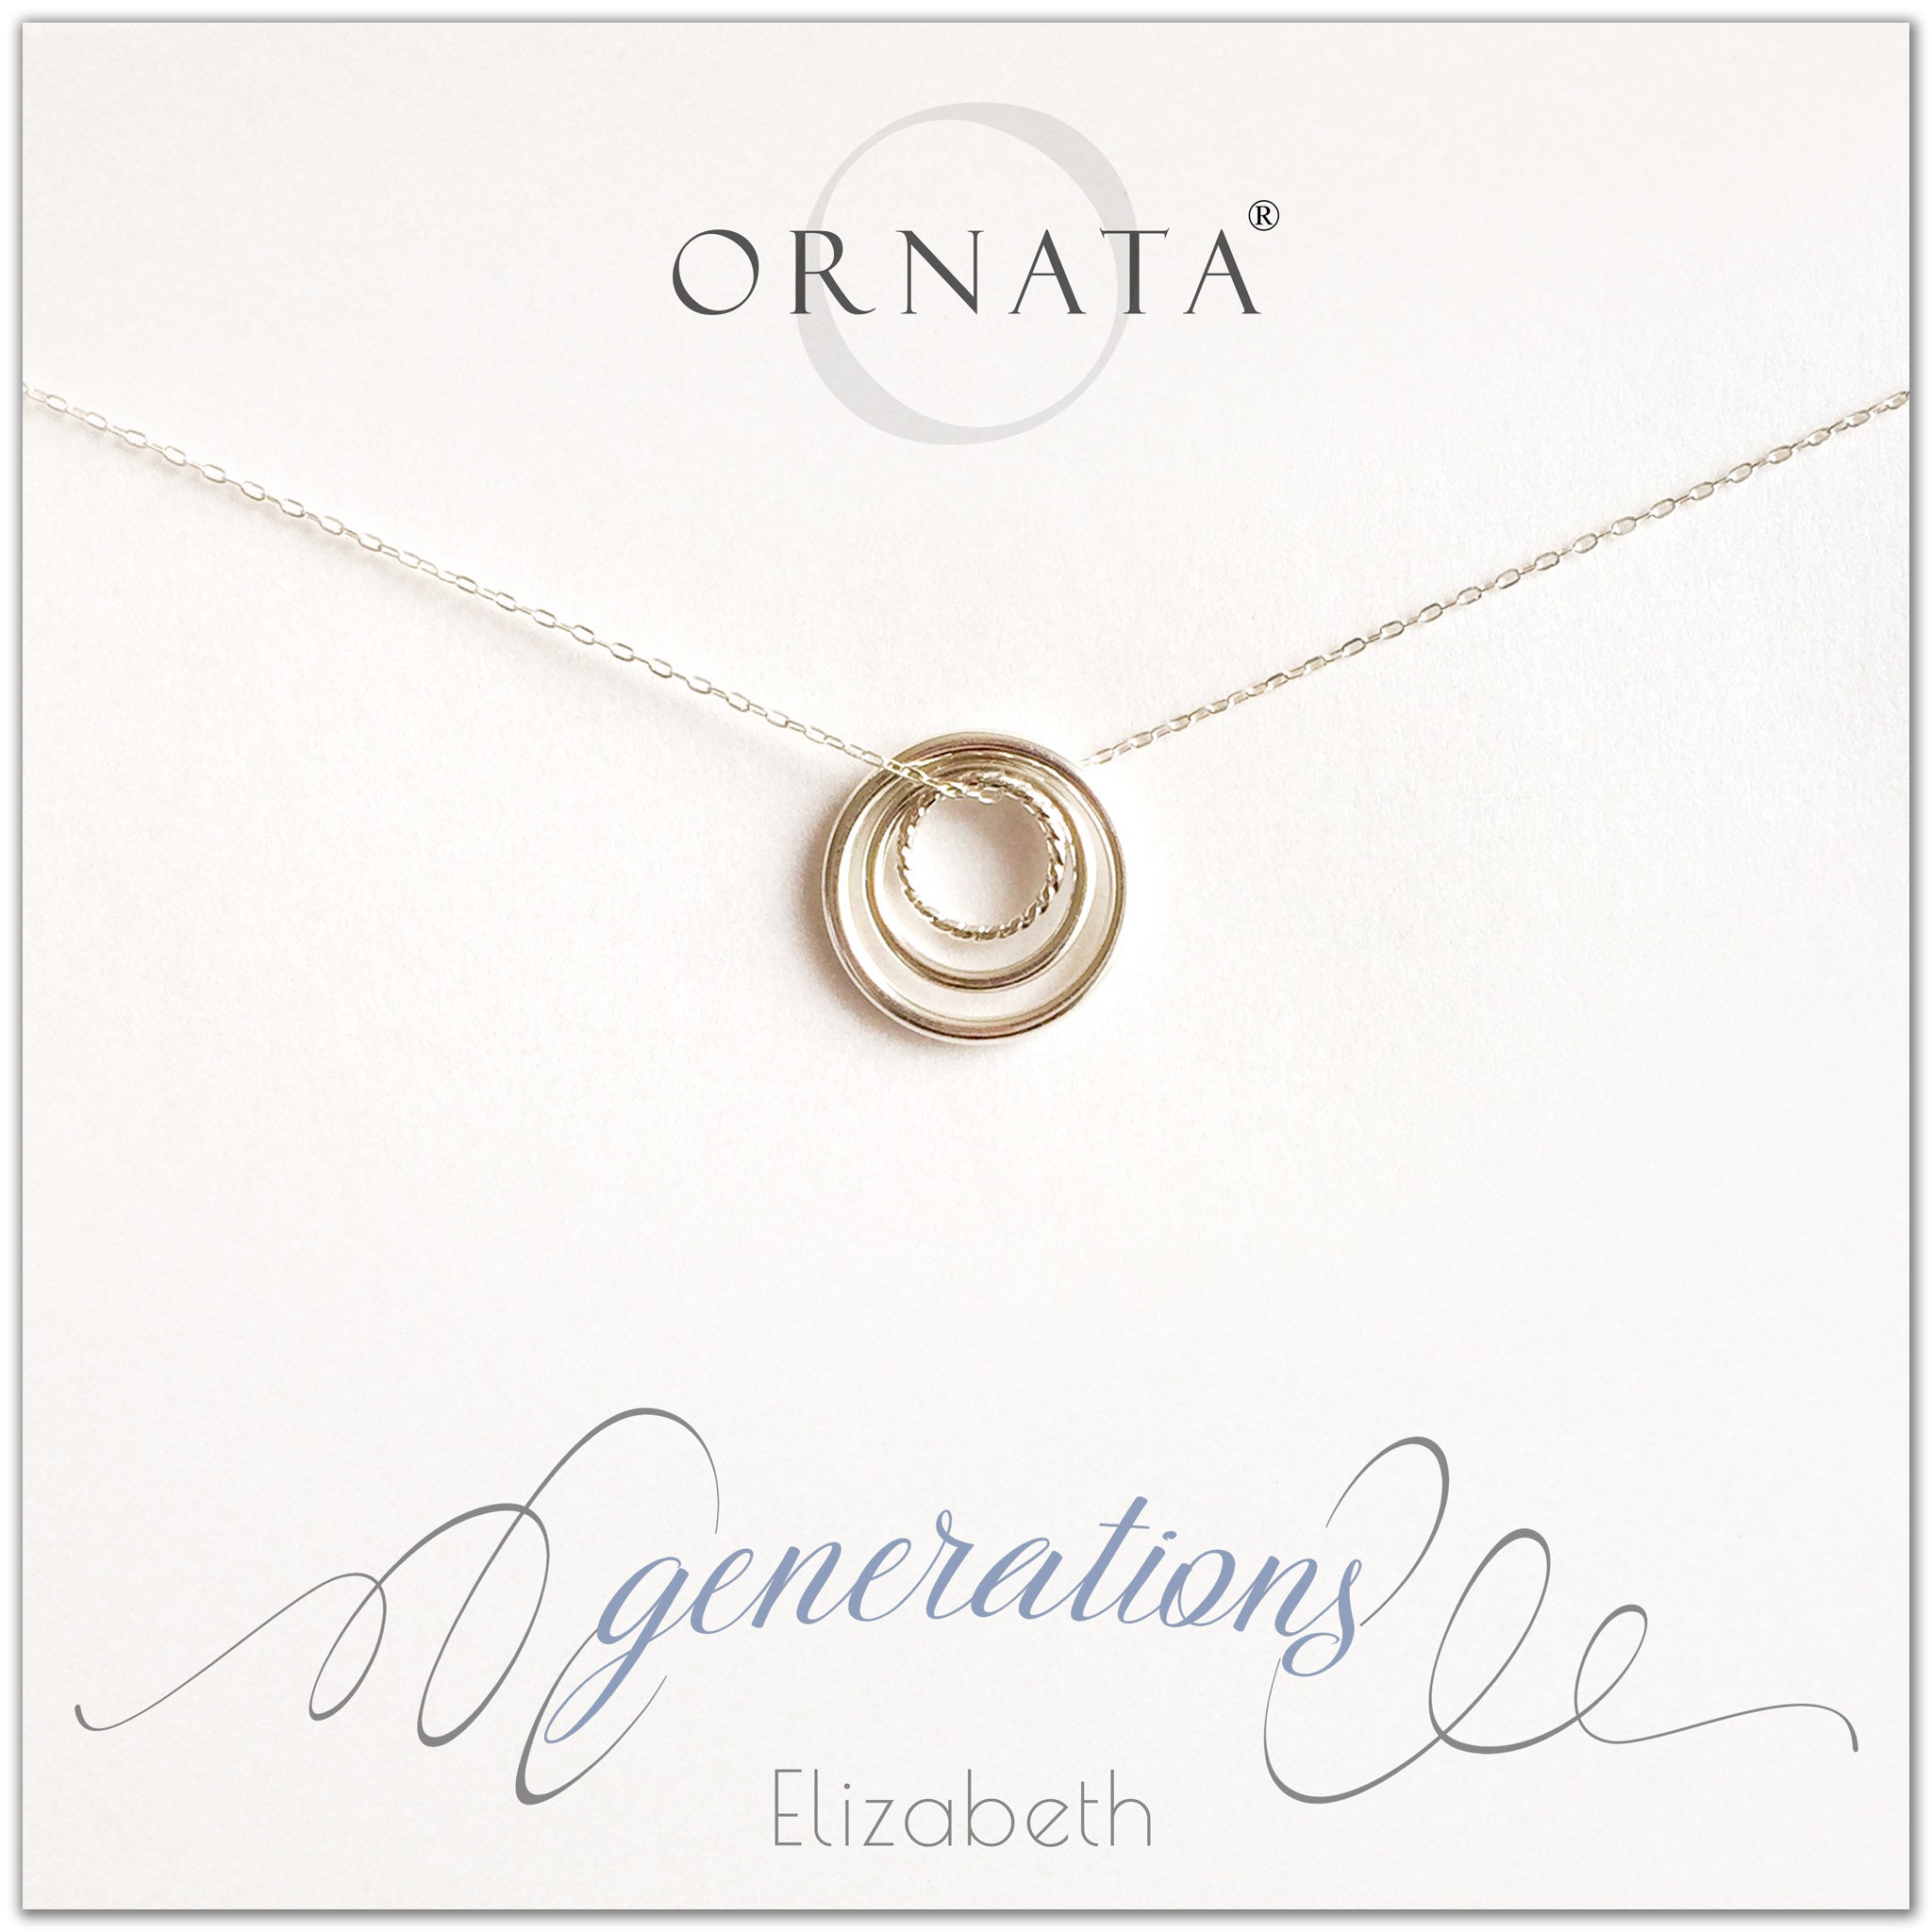 Generations Jewelry - personalized silver necklaces. Our sterling silver custom jewelry is a perfect gift for mothers, daughters, granddaughters, grandmothers, grandmas, sisters, or family members. Three rings represent three generations. Perfect gift for Mother’s Day or Mother’s Day Jewelry. 